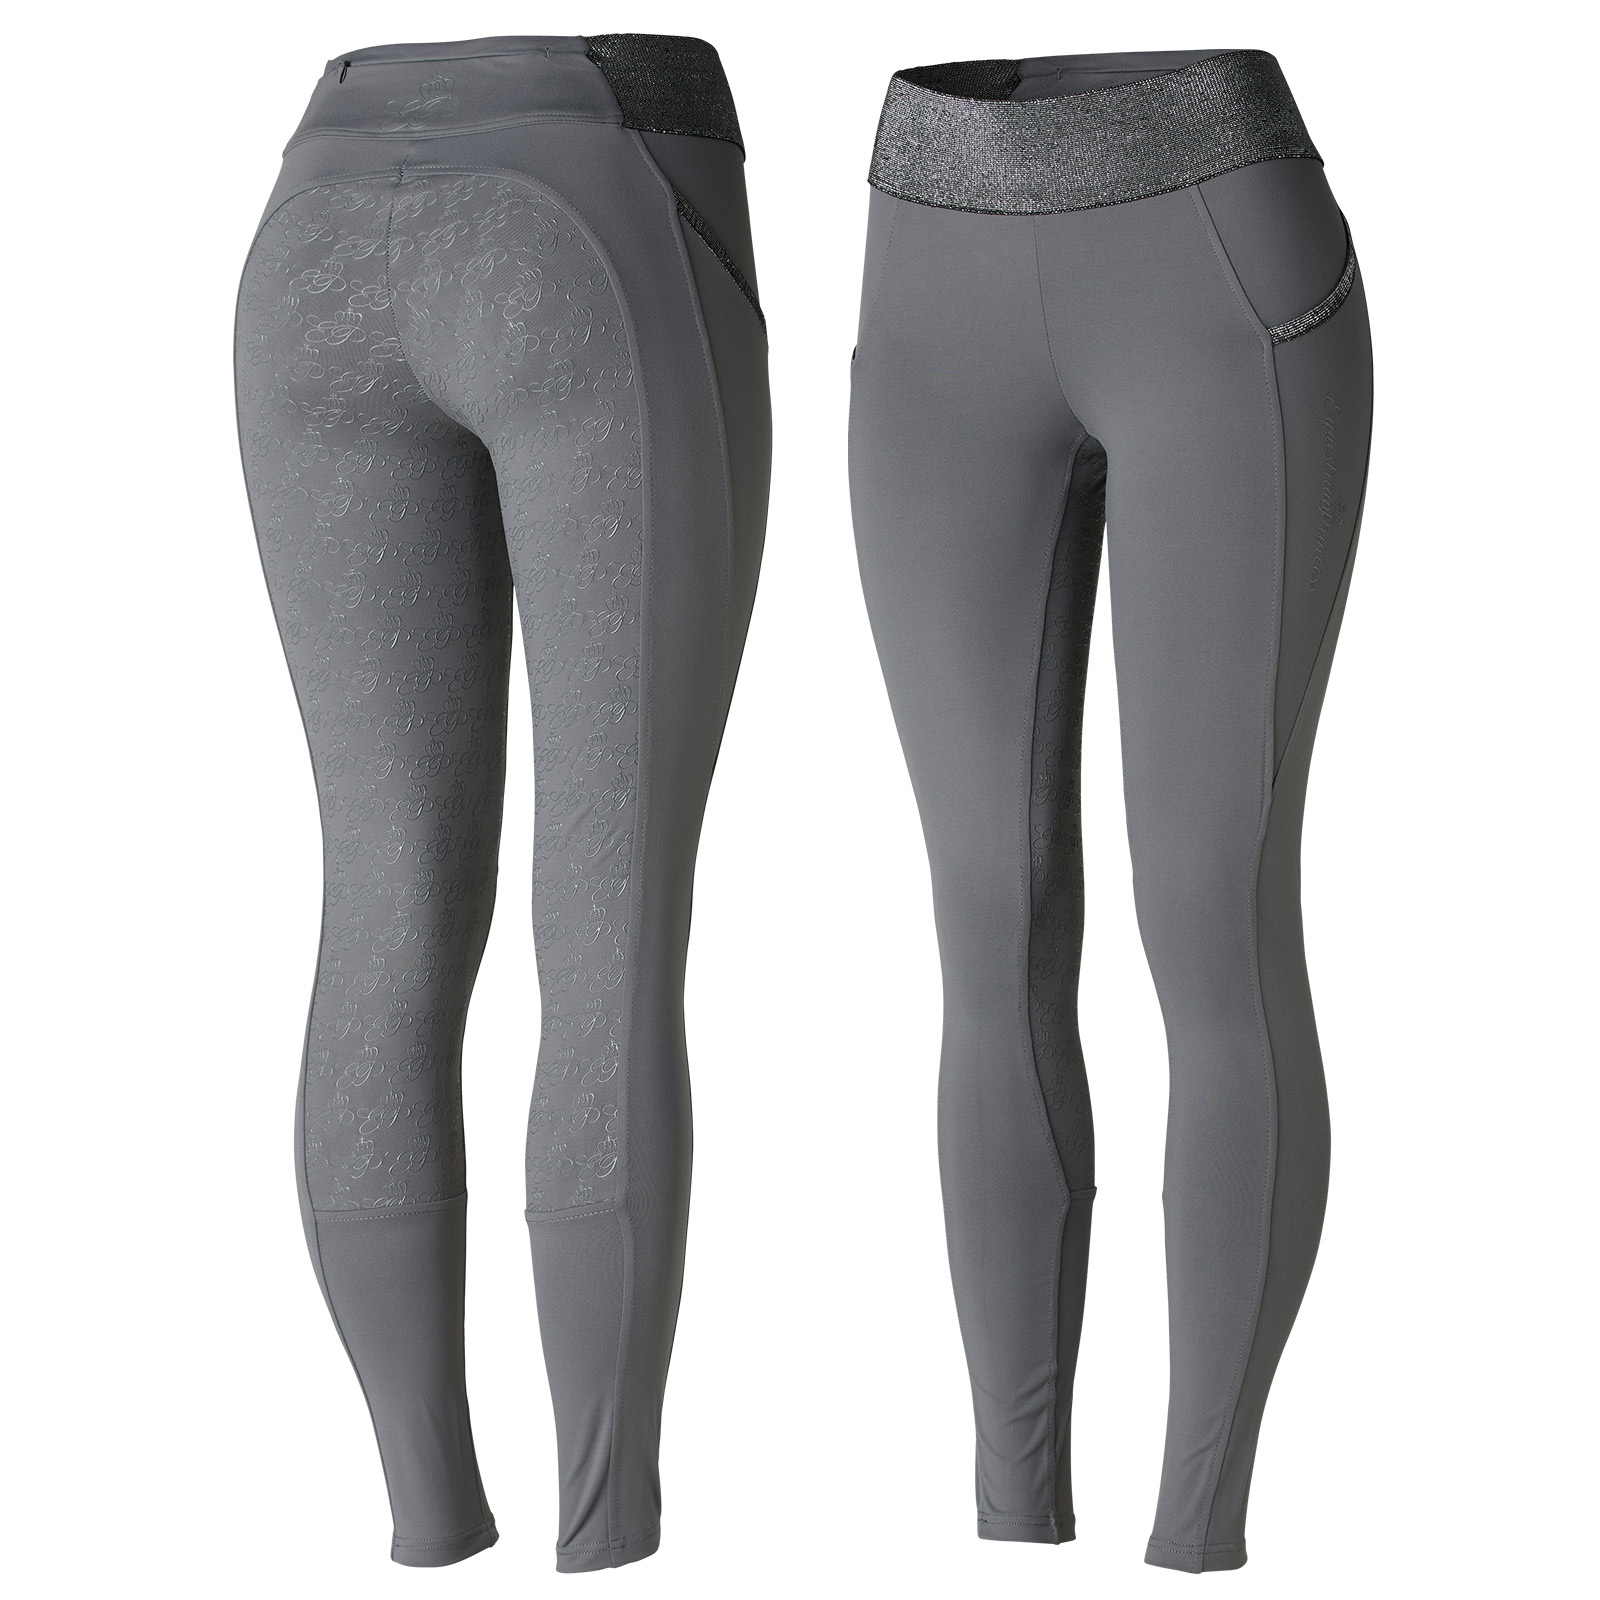 Quality Equestrian Horse Riding Tights Full Seat - CrystalEquine